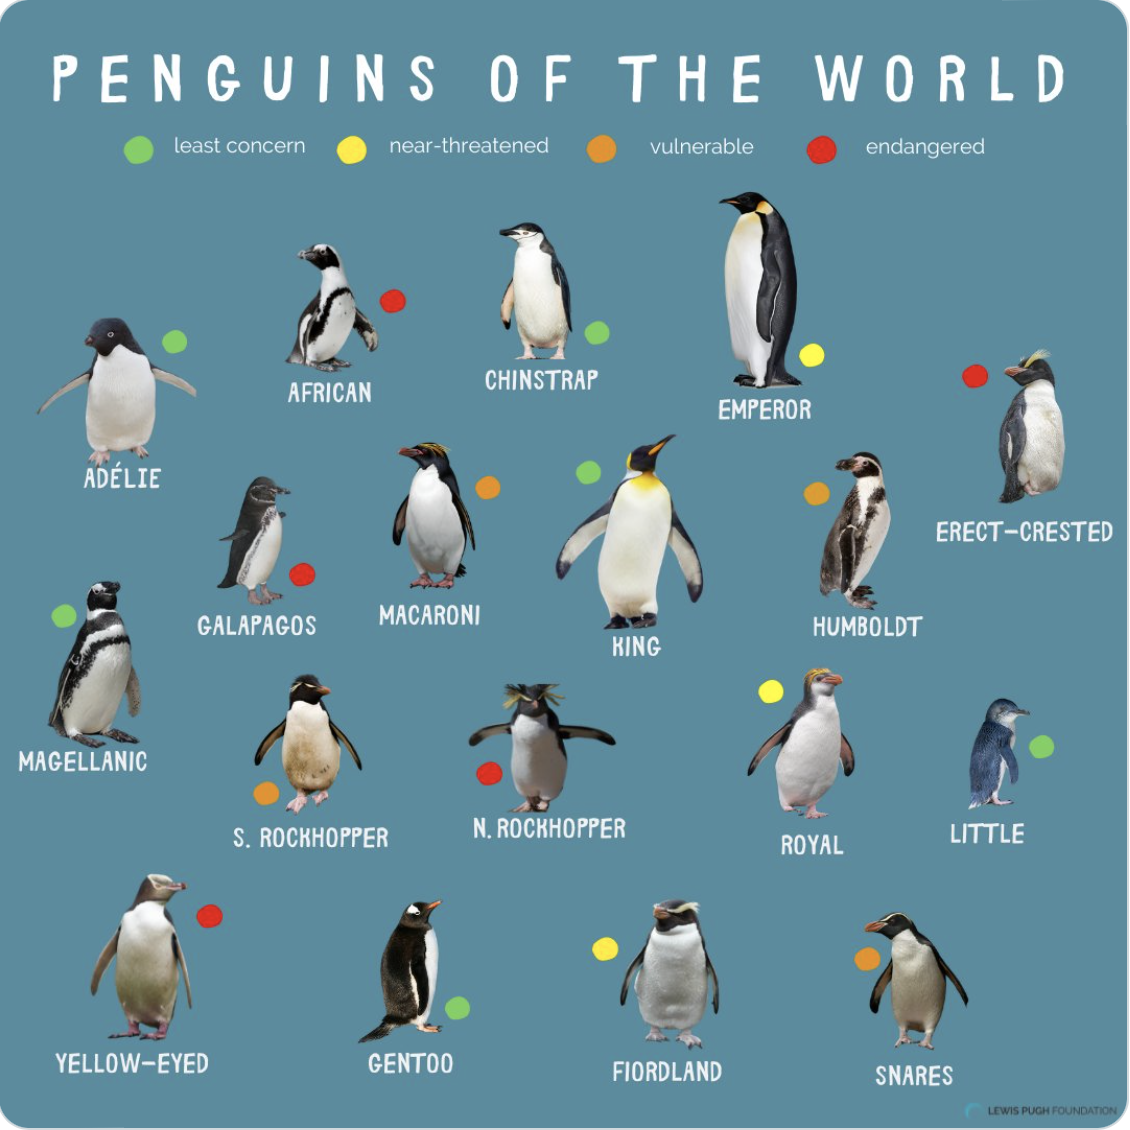 January 20 Penguin Awareness Day good opportunity to a